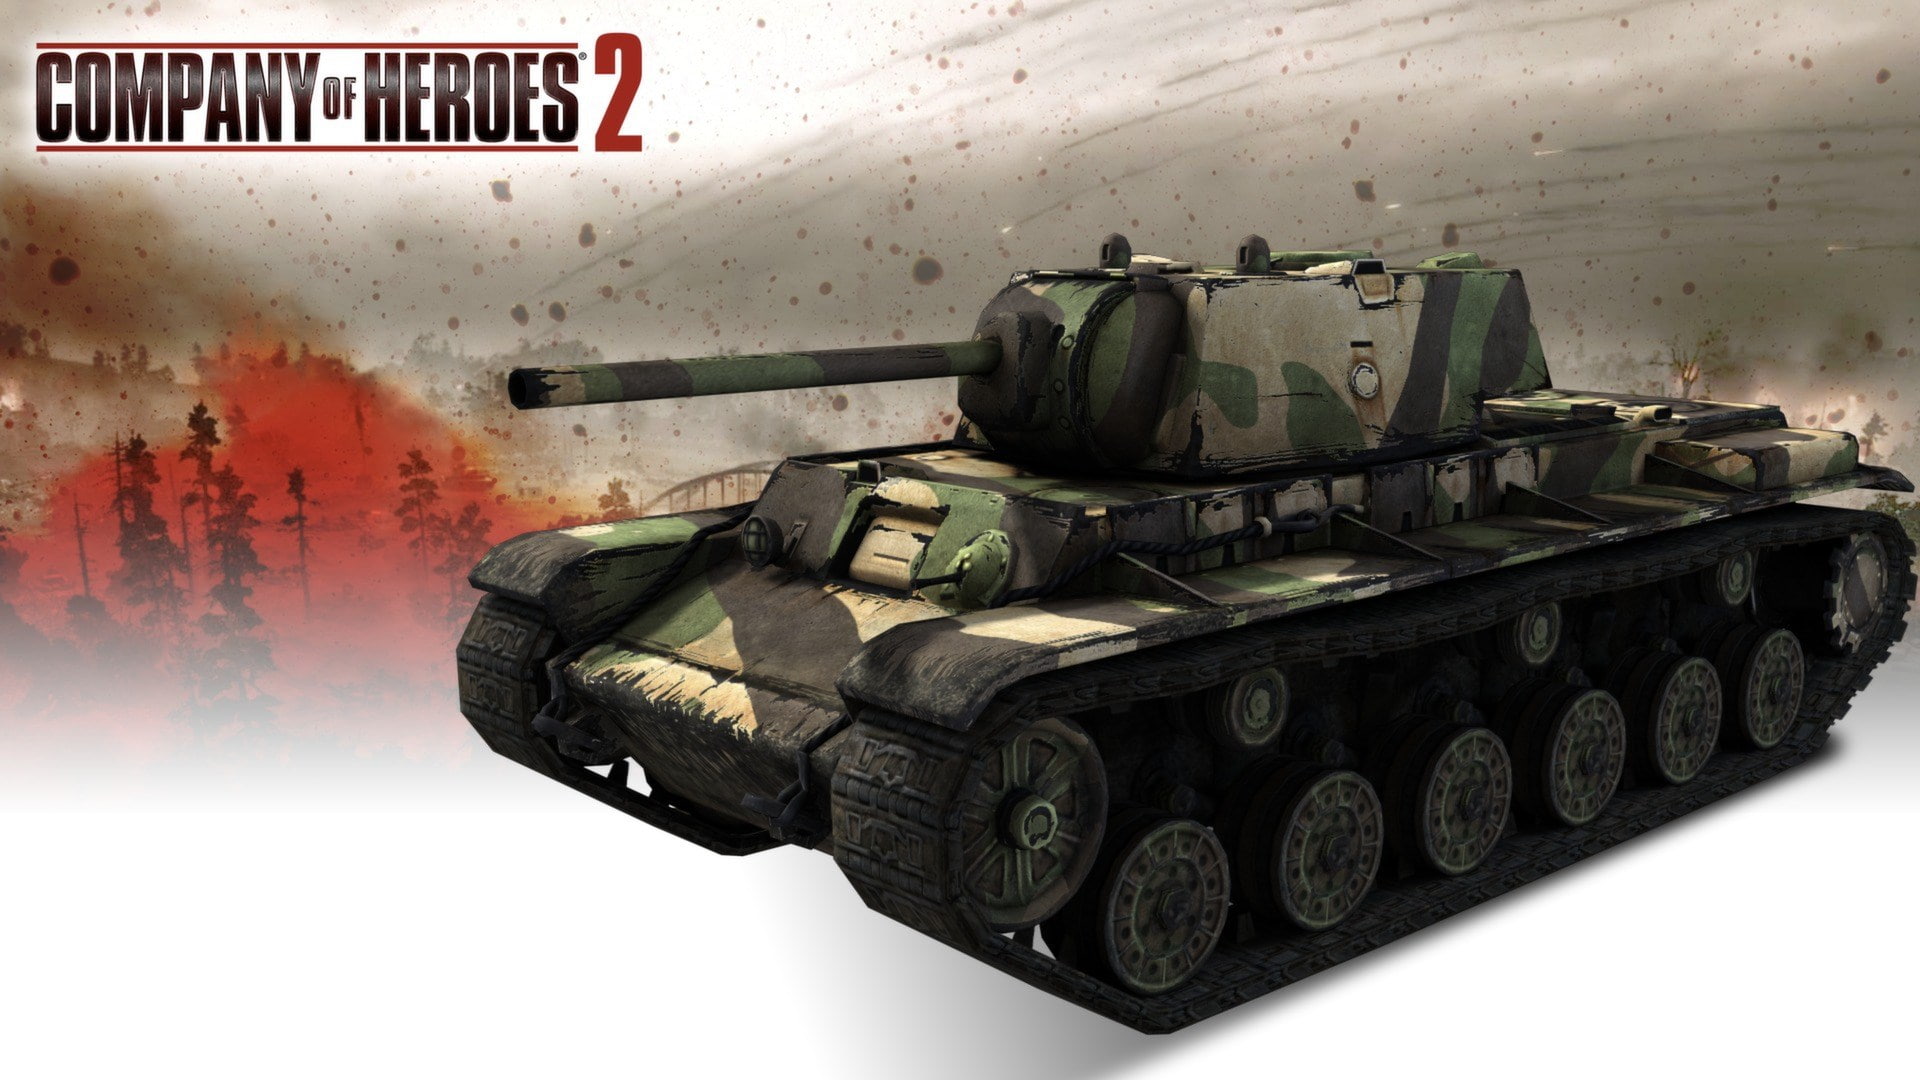 Company of Heroes 2, military, war, conflict, no people, weapon